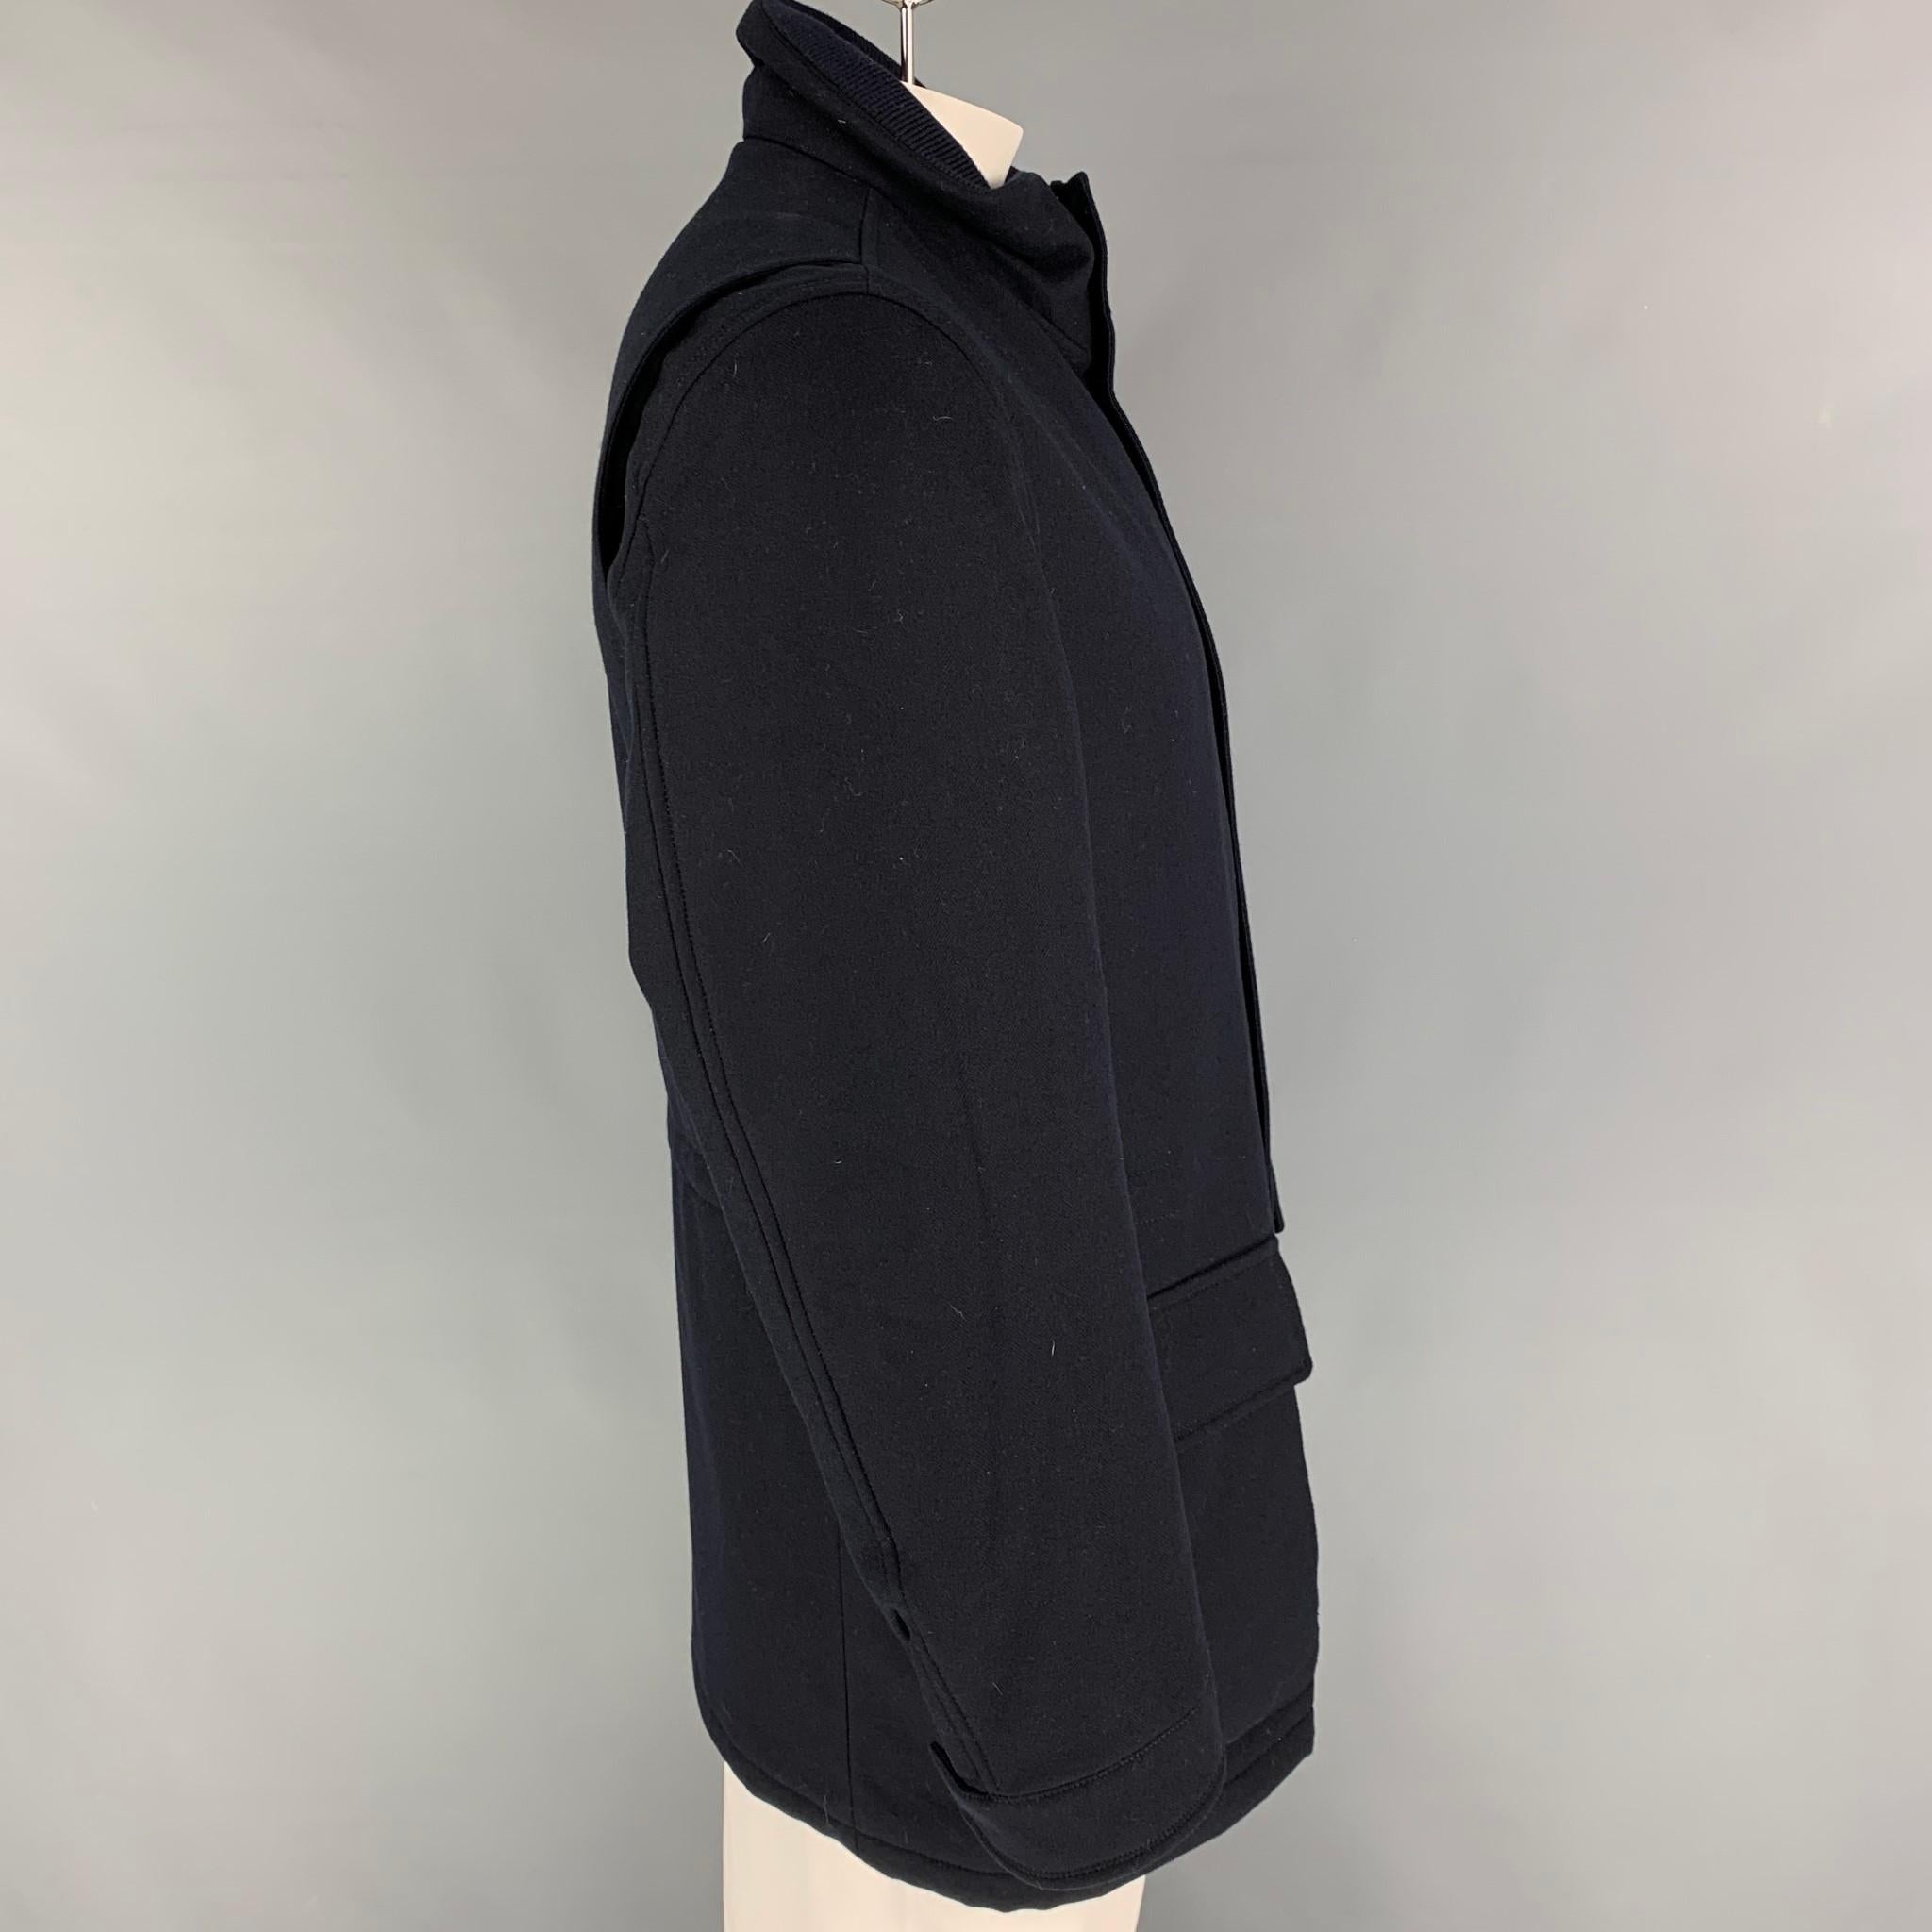 ERMENEGILDO ZEGNA jacket comes in black wool / cashmere featuring a high collar, patch pockets, and a hidden zip & snap button closure. Made in Italy. 

New With Tags. 
Marked: 48 R
Original Retail Price: $3,395.00

Measurements:

Shoulder: 19